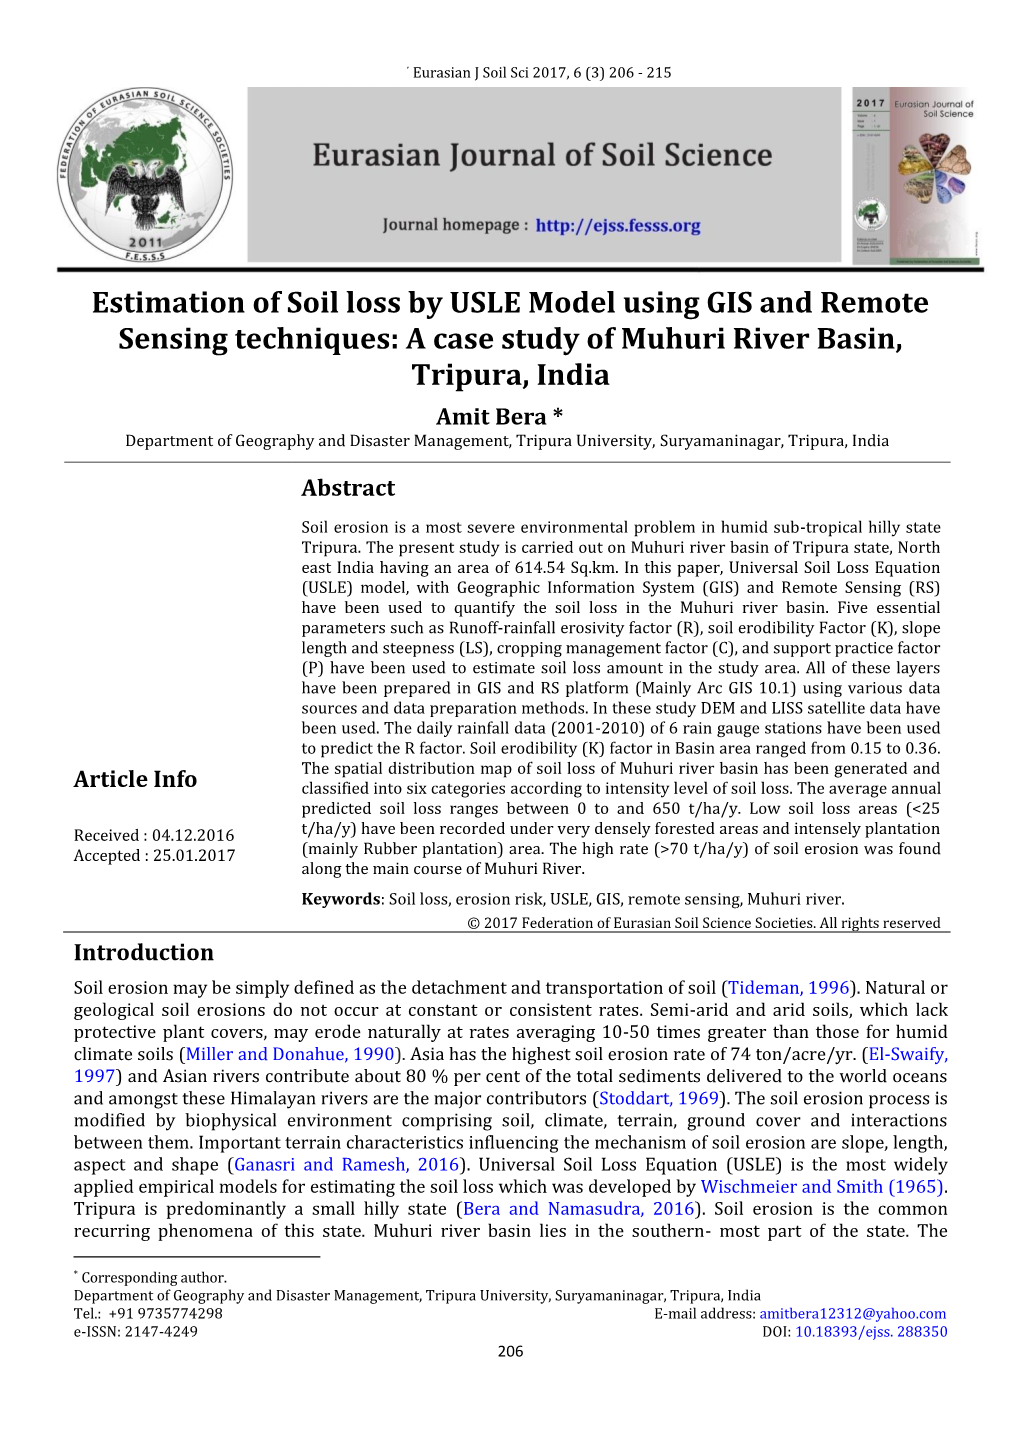 Estimation of Soil Loss by USLE Model Using GIS and Remote Sensing Techniques: a Case Study of Muhuri River Basin, Tripura, India